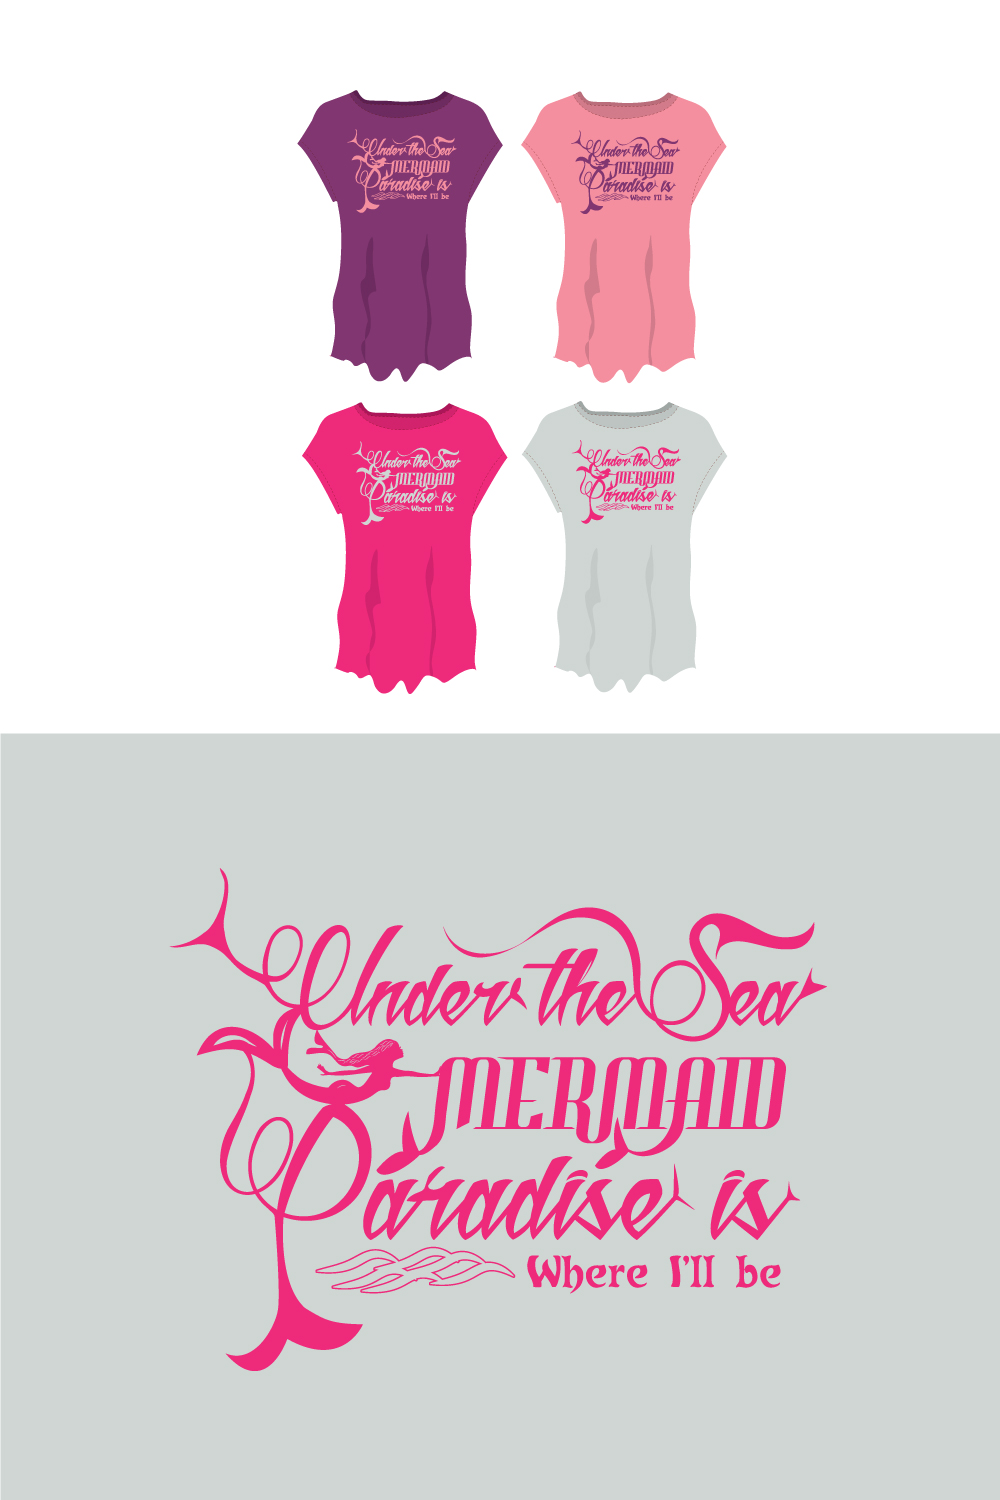 his is a perfect Under The Sea Mermaid Paradise is Where I\'ll Be Baby girls tops and t shirt design pinterest preview image.